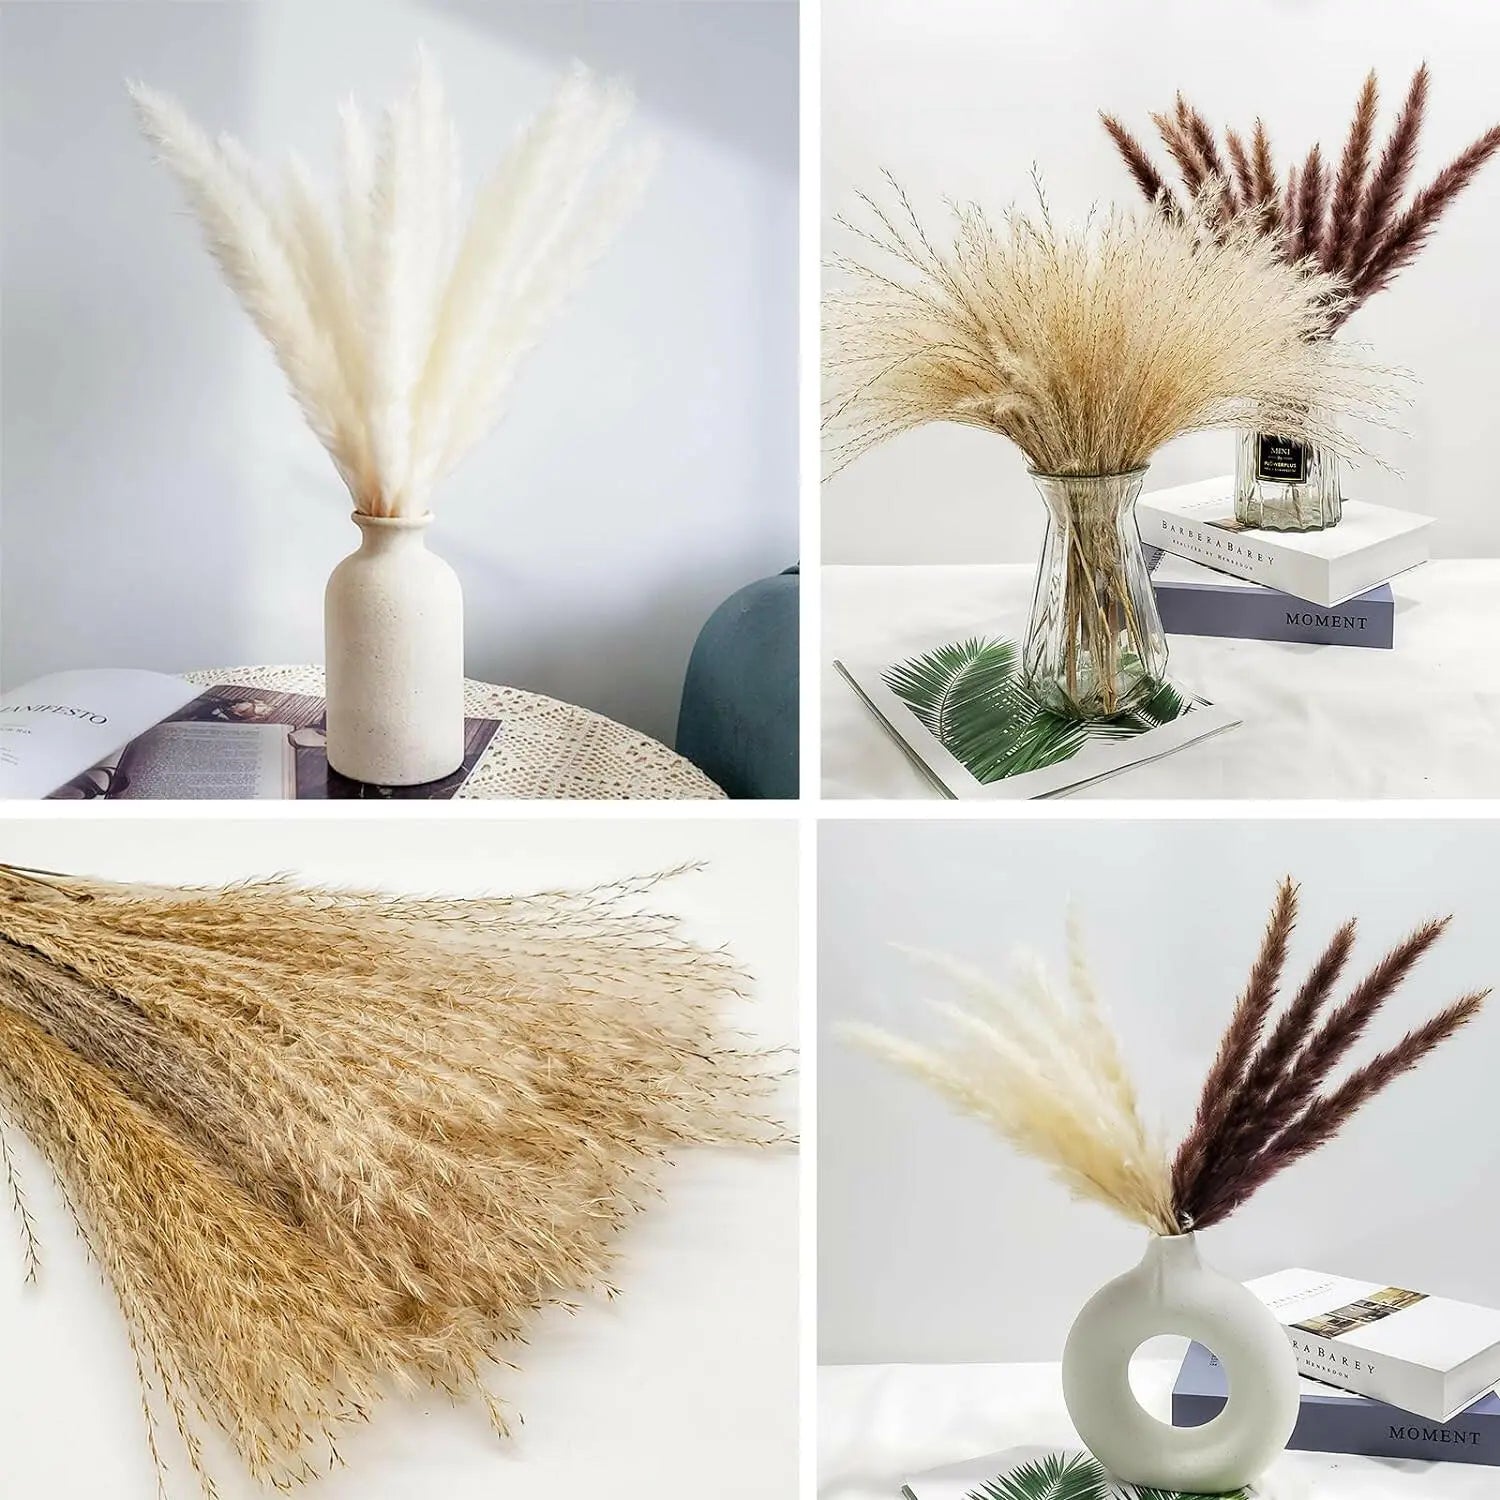 RbeuFolr Natural Dried Pampas Grass for Home Decor (Brown/White, 60 Pieces)